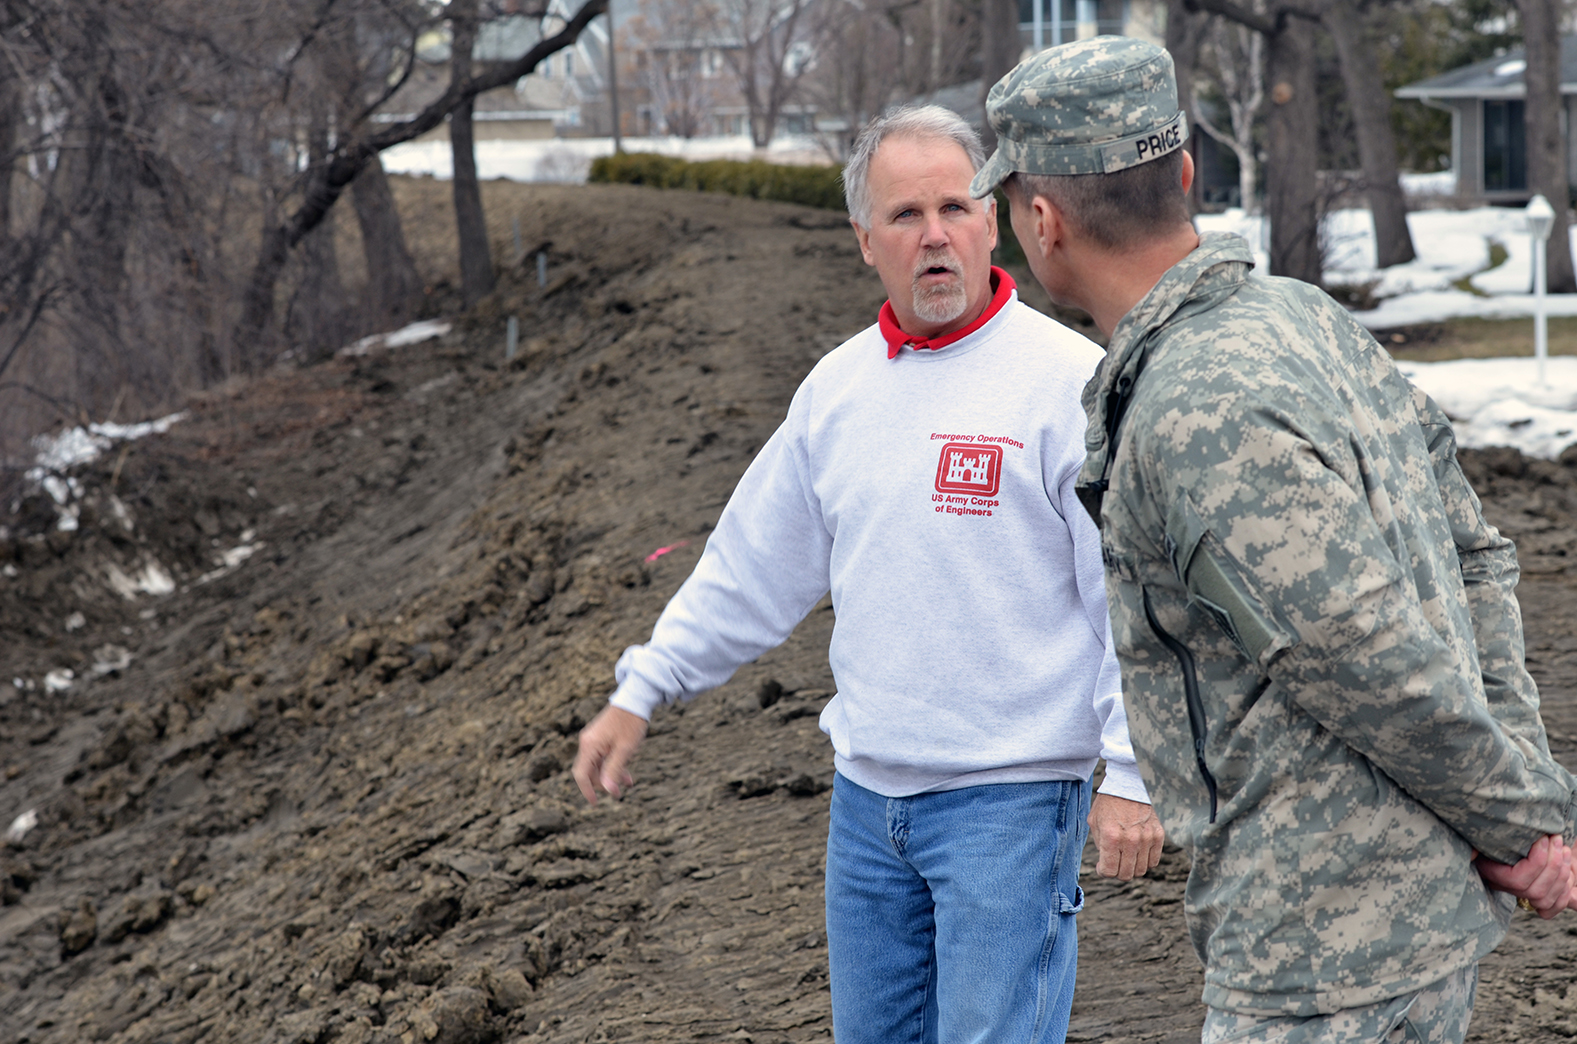 Tim Bertschi, U.S. Army Corps of Engineers, St. Paul District area flood manager for the Red River of the North, and Col. Michael Price, Corps of Engineers, St. Paul District commander, discuss the Corps’ temporary emergency levee construction to assist the city of Fargo